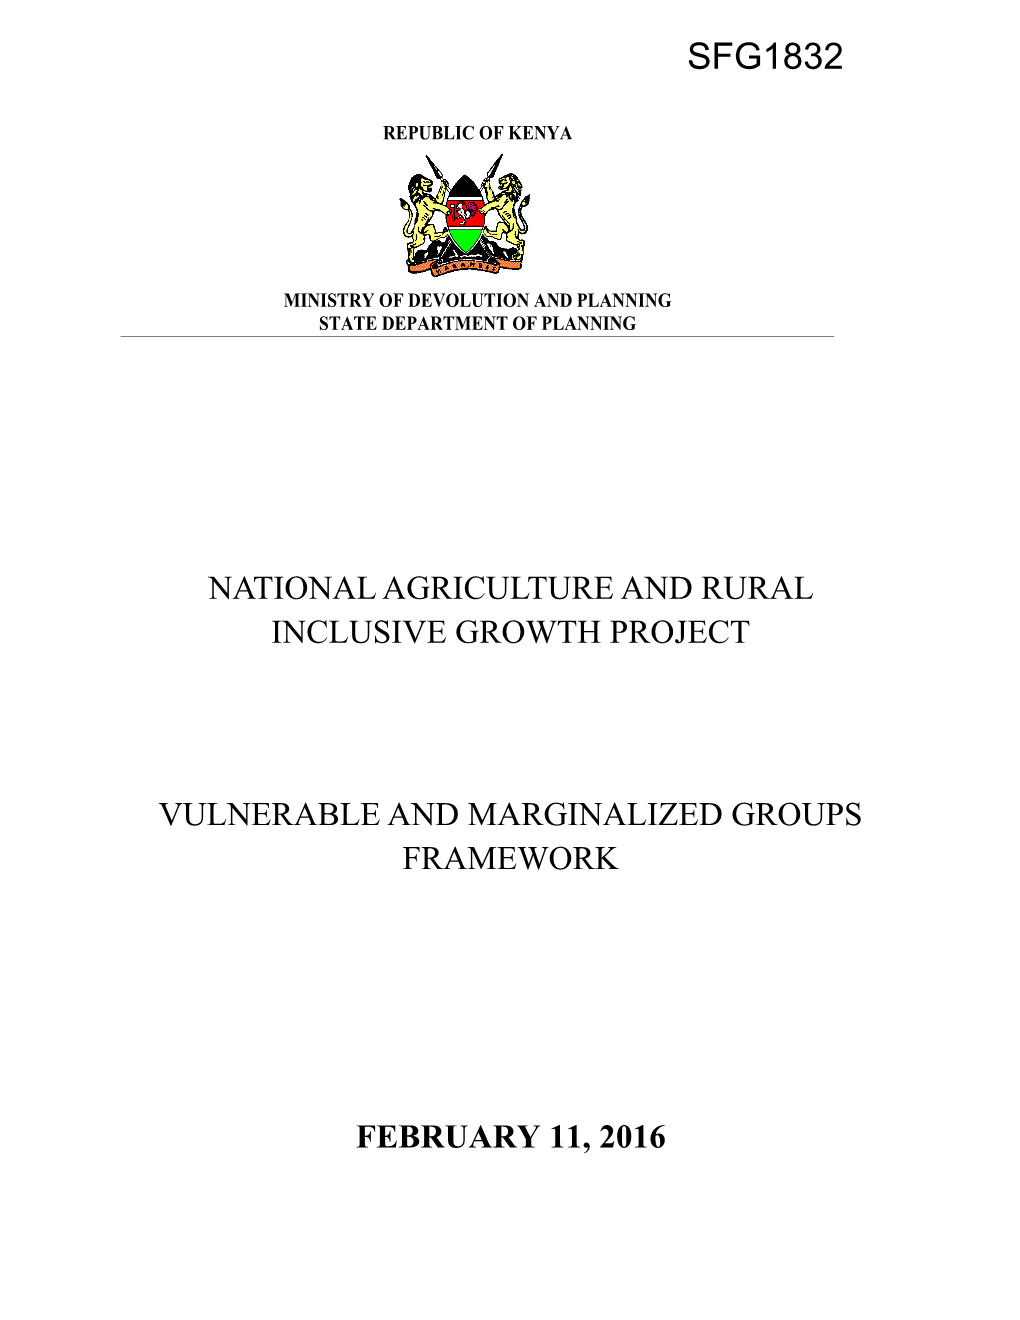 Ministry of Devolution and Planning